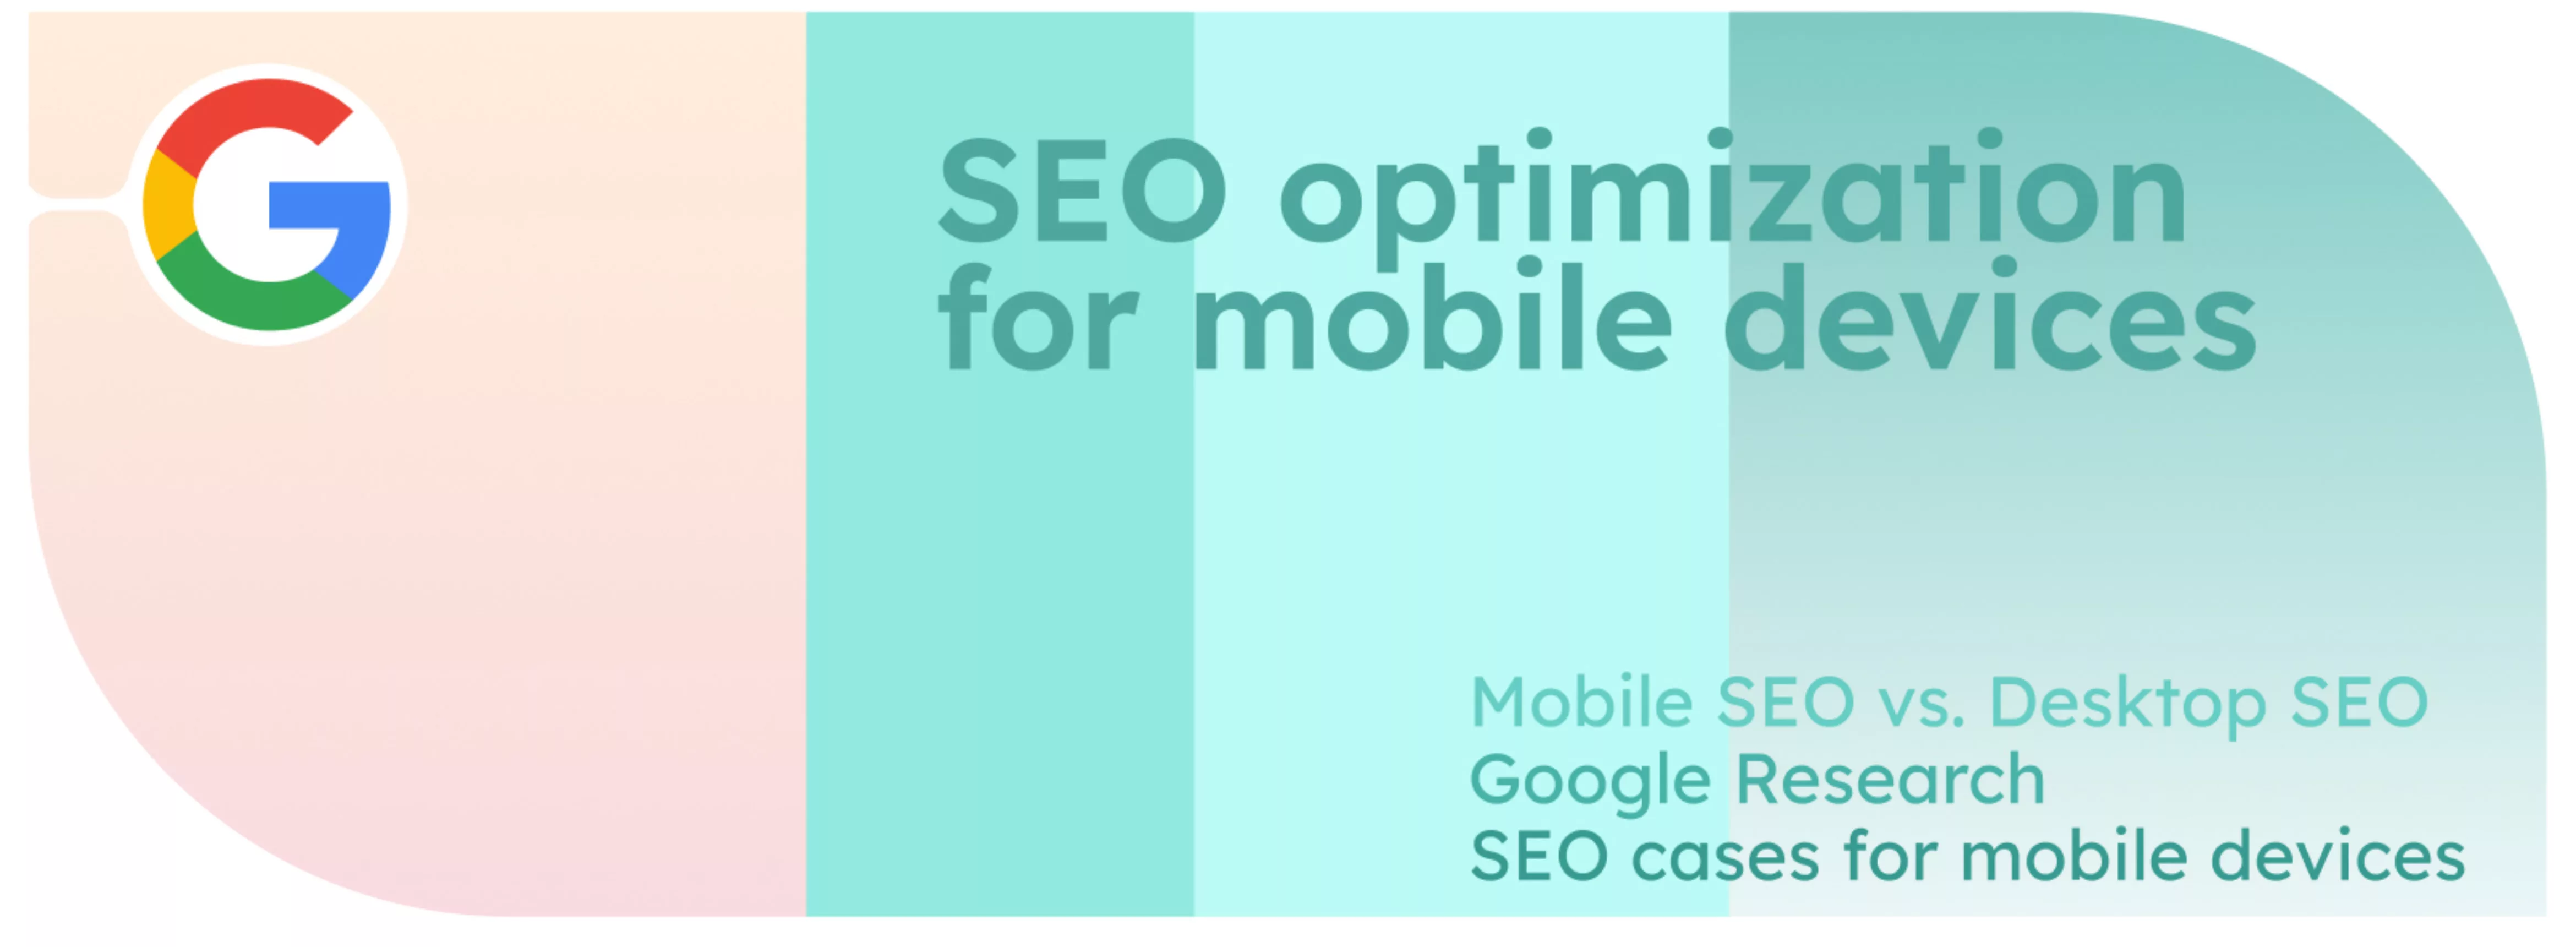 SEO optimization for mobile devices